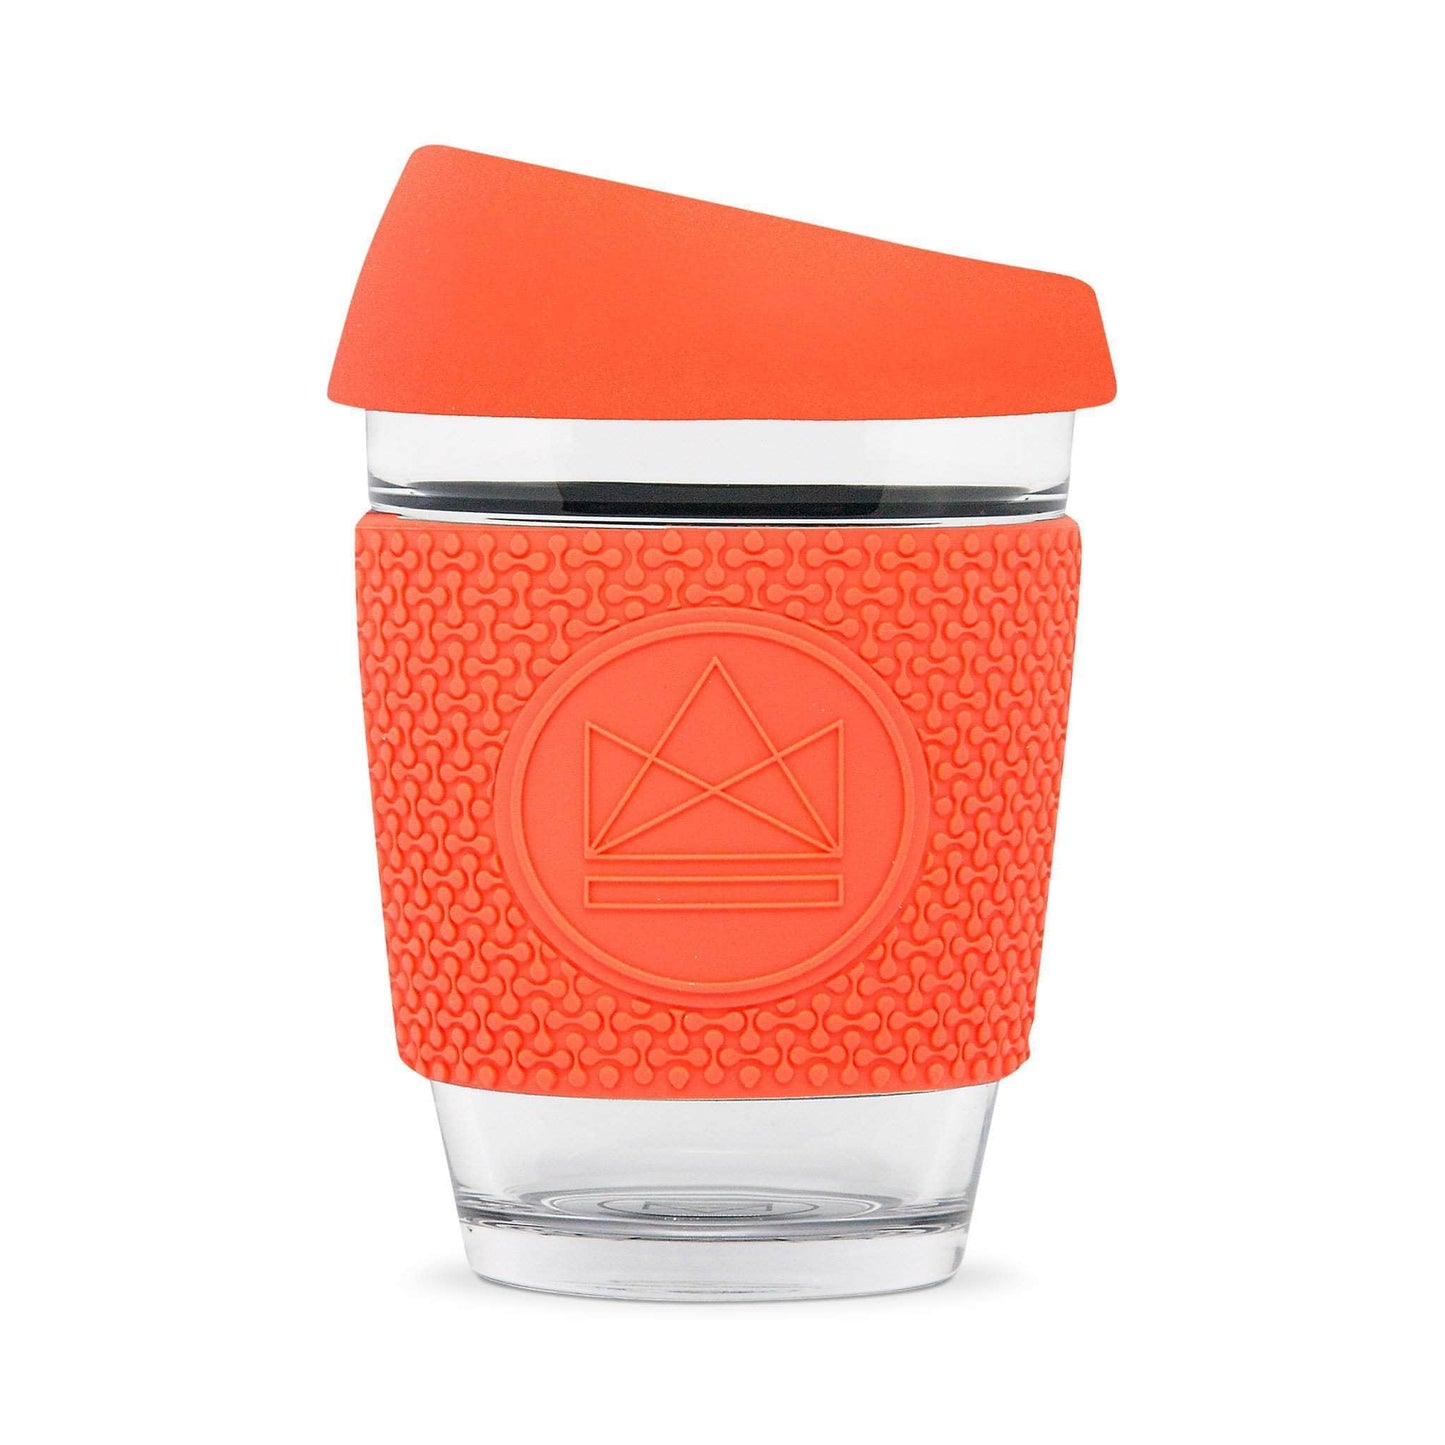 Neon Kactus Coffee Cup Neon Kactus - Glass Coffee Cups - 12oz - Dream Believer Red/Coral